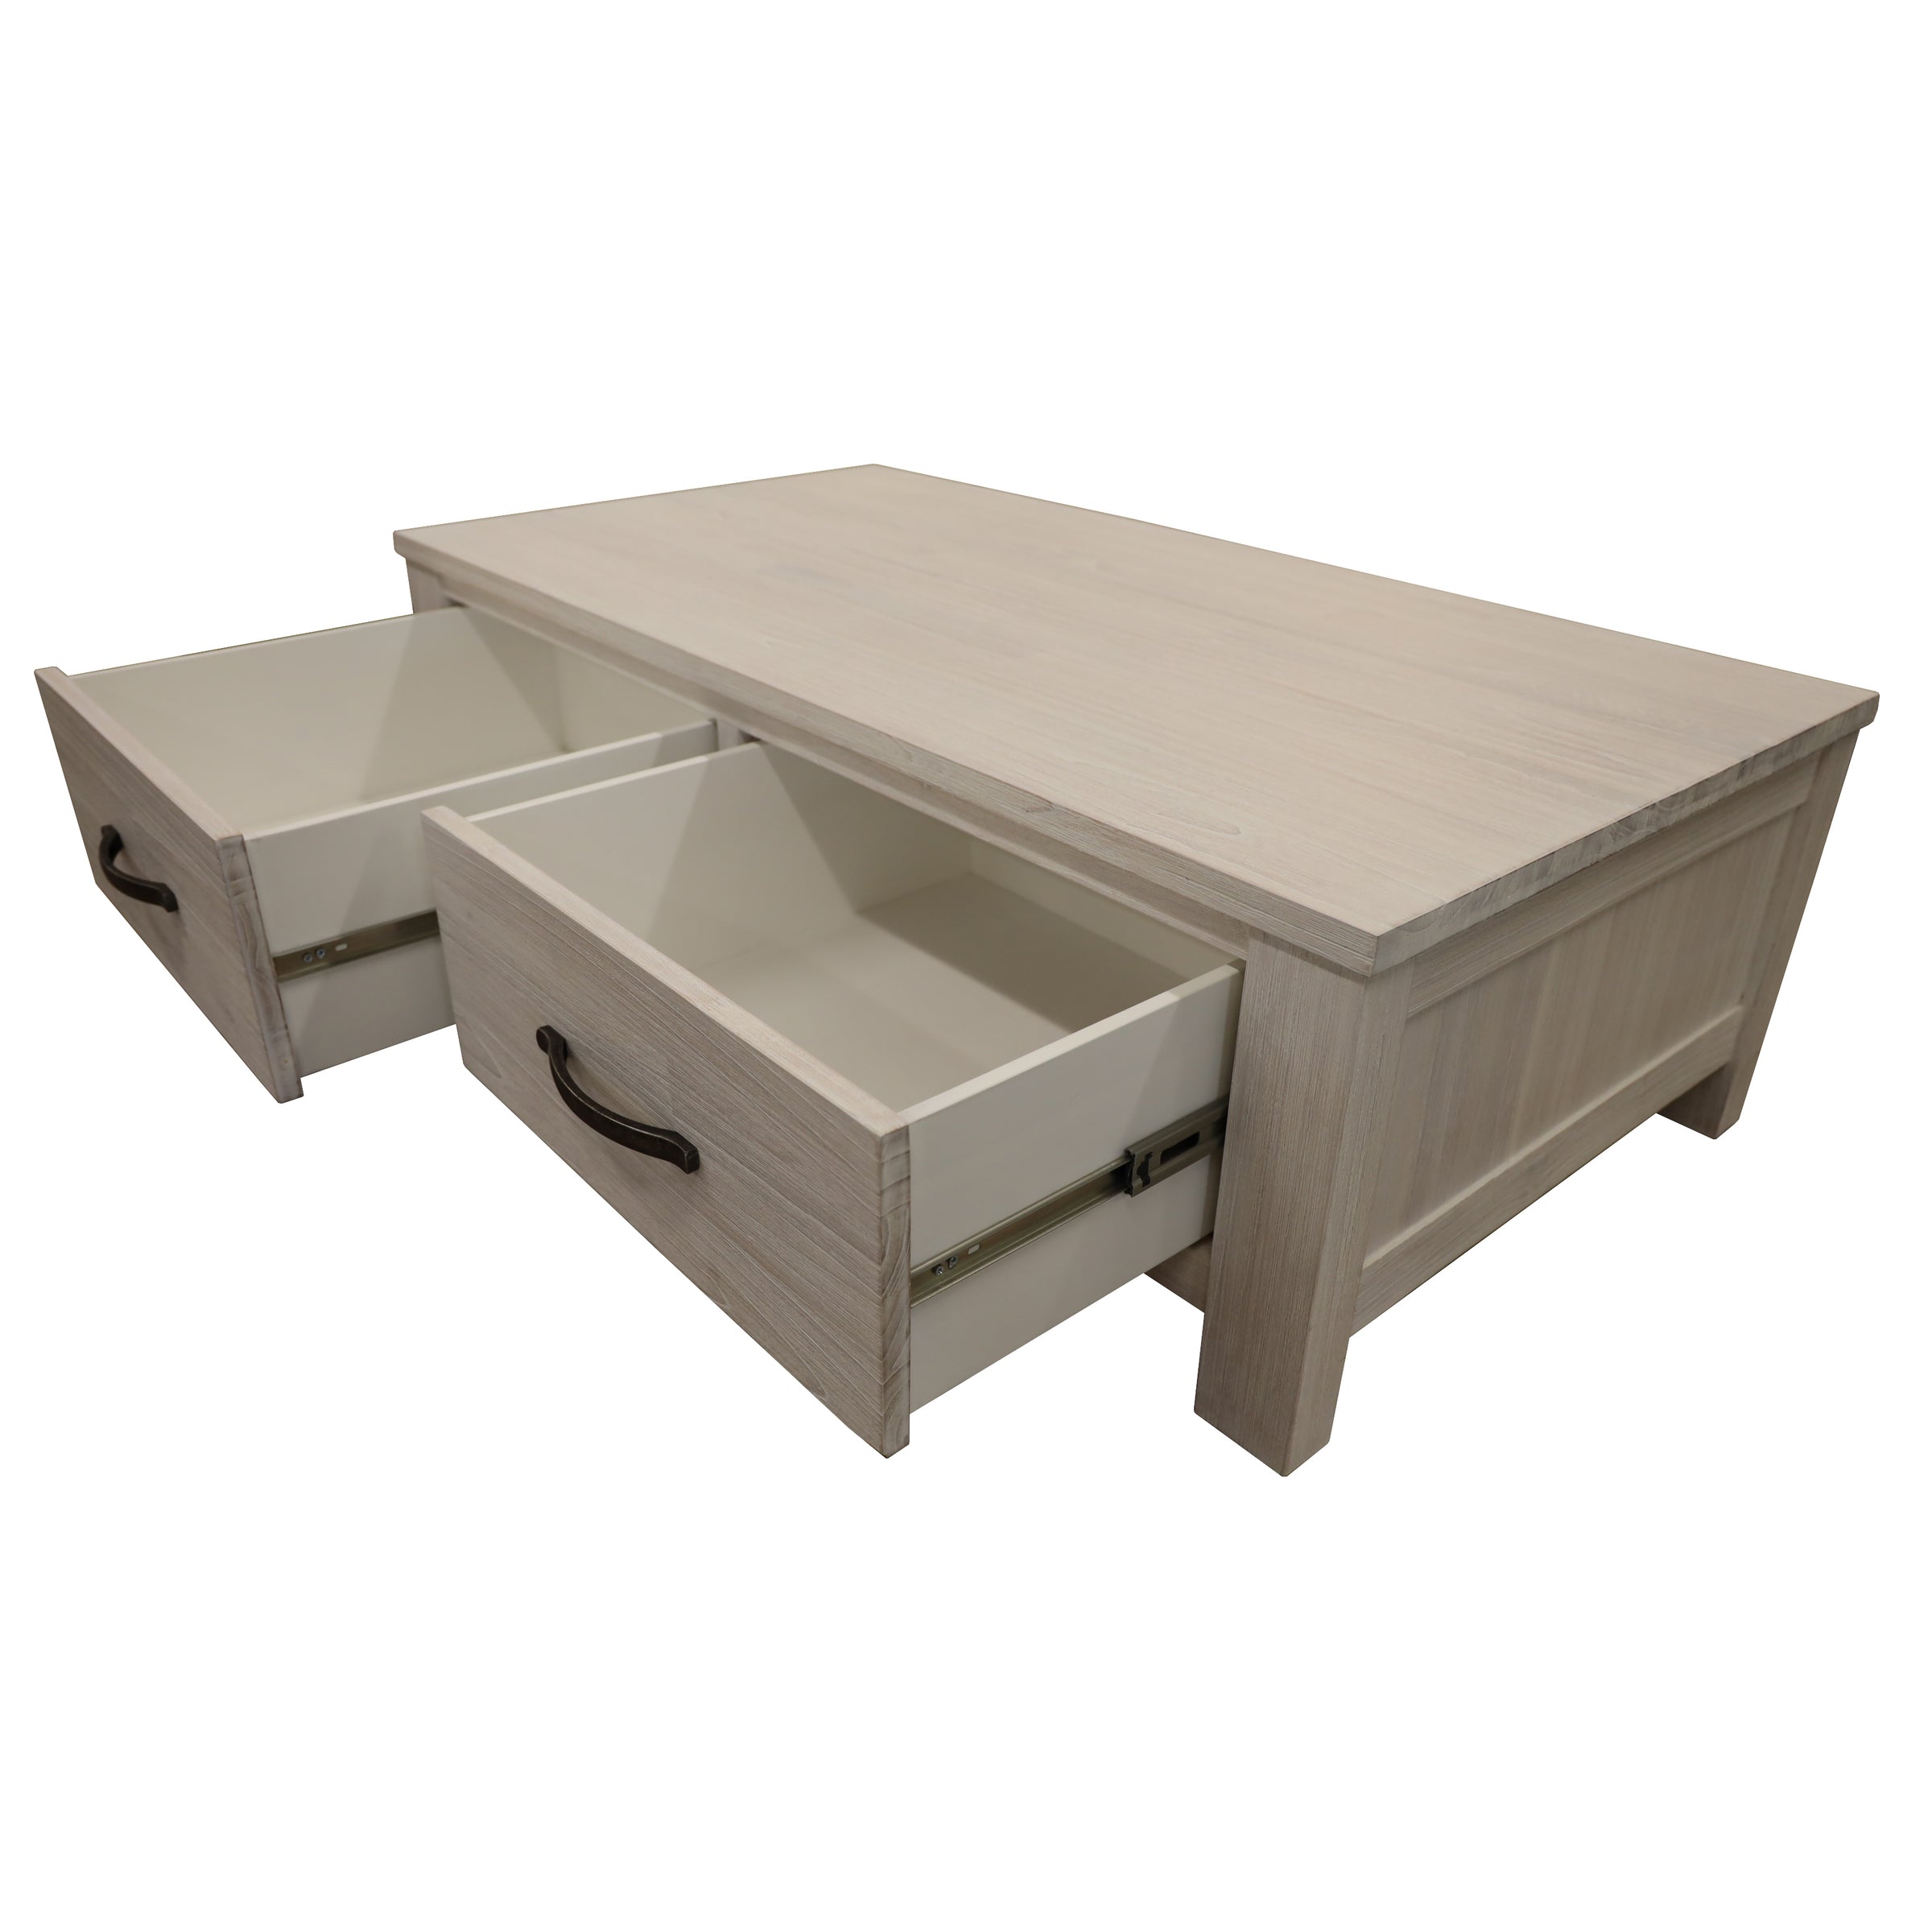 Foxglove Coffee Table with 2 Drawer Solid Mt Ash Wood in White - 127cm - Notbrand